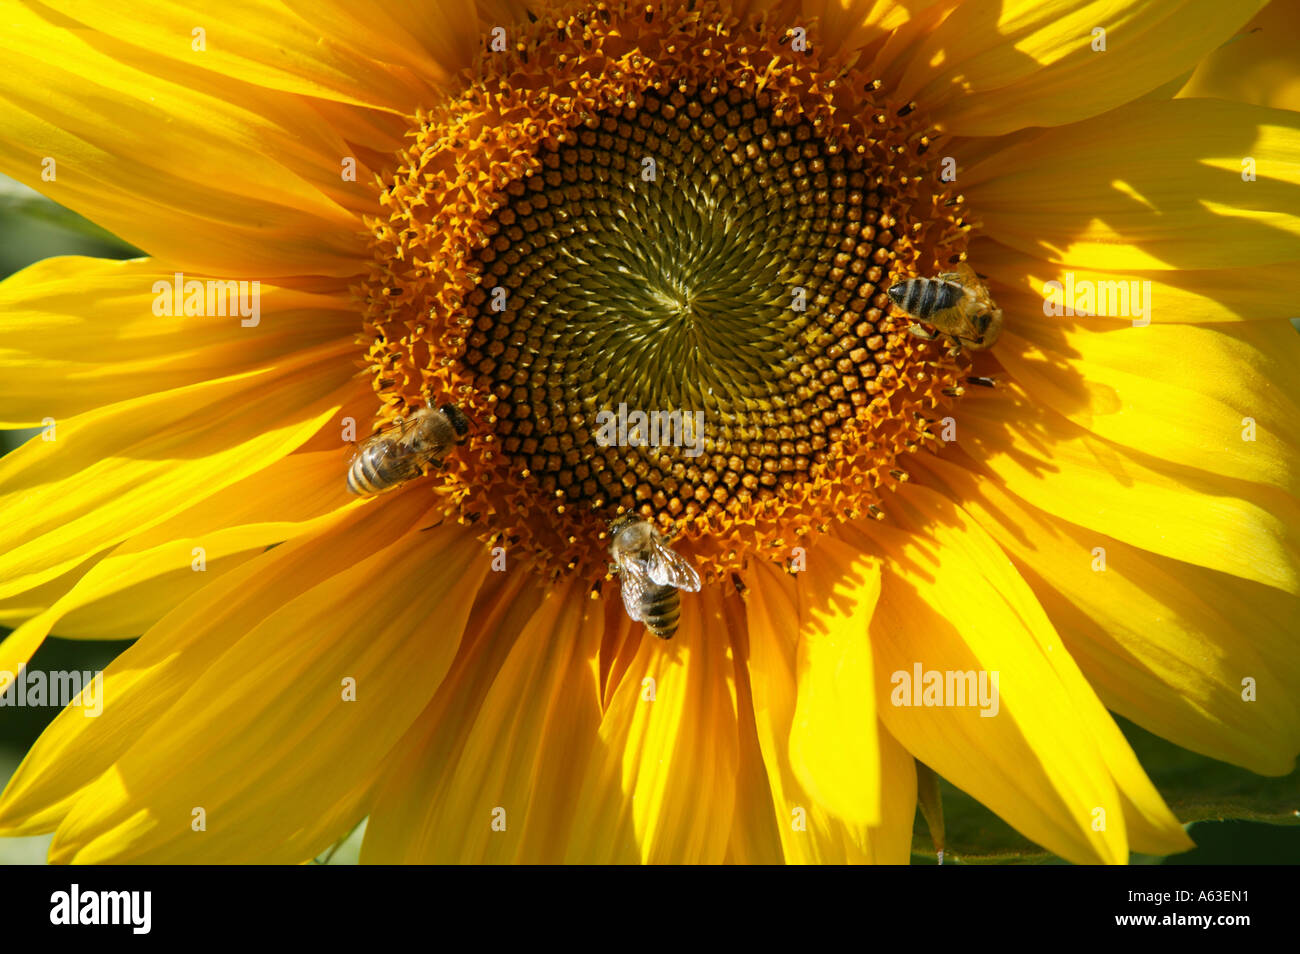 Close-up of bees pollinating on Sunflower (Helianthus annuus) Stock Photo